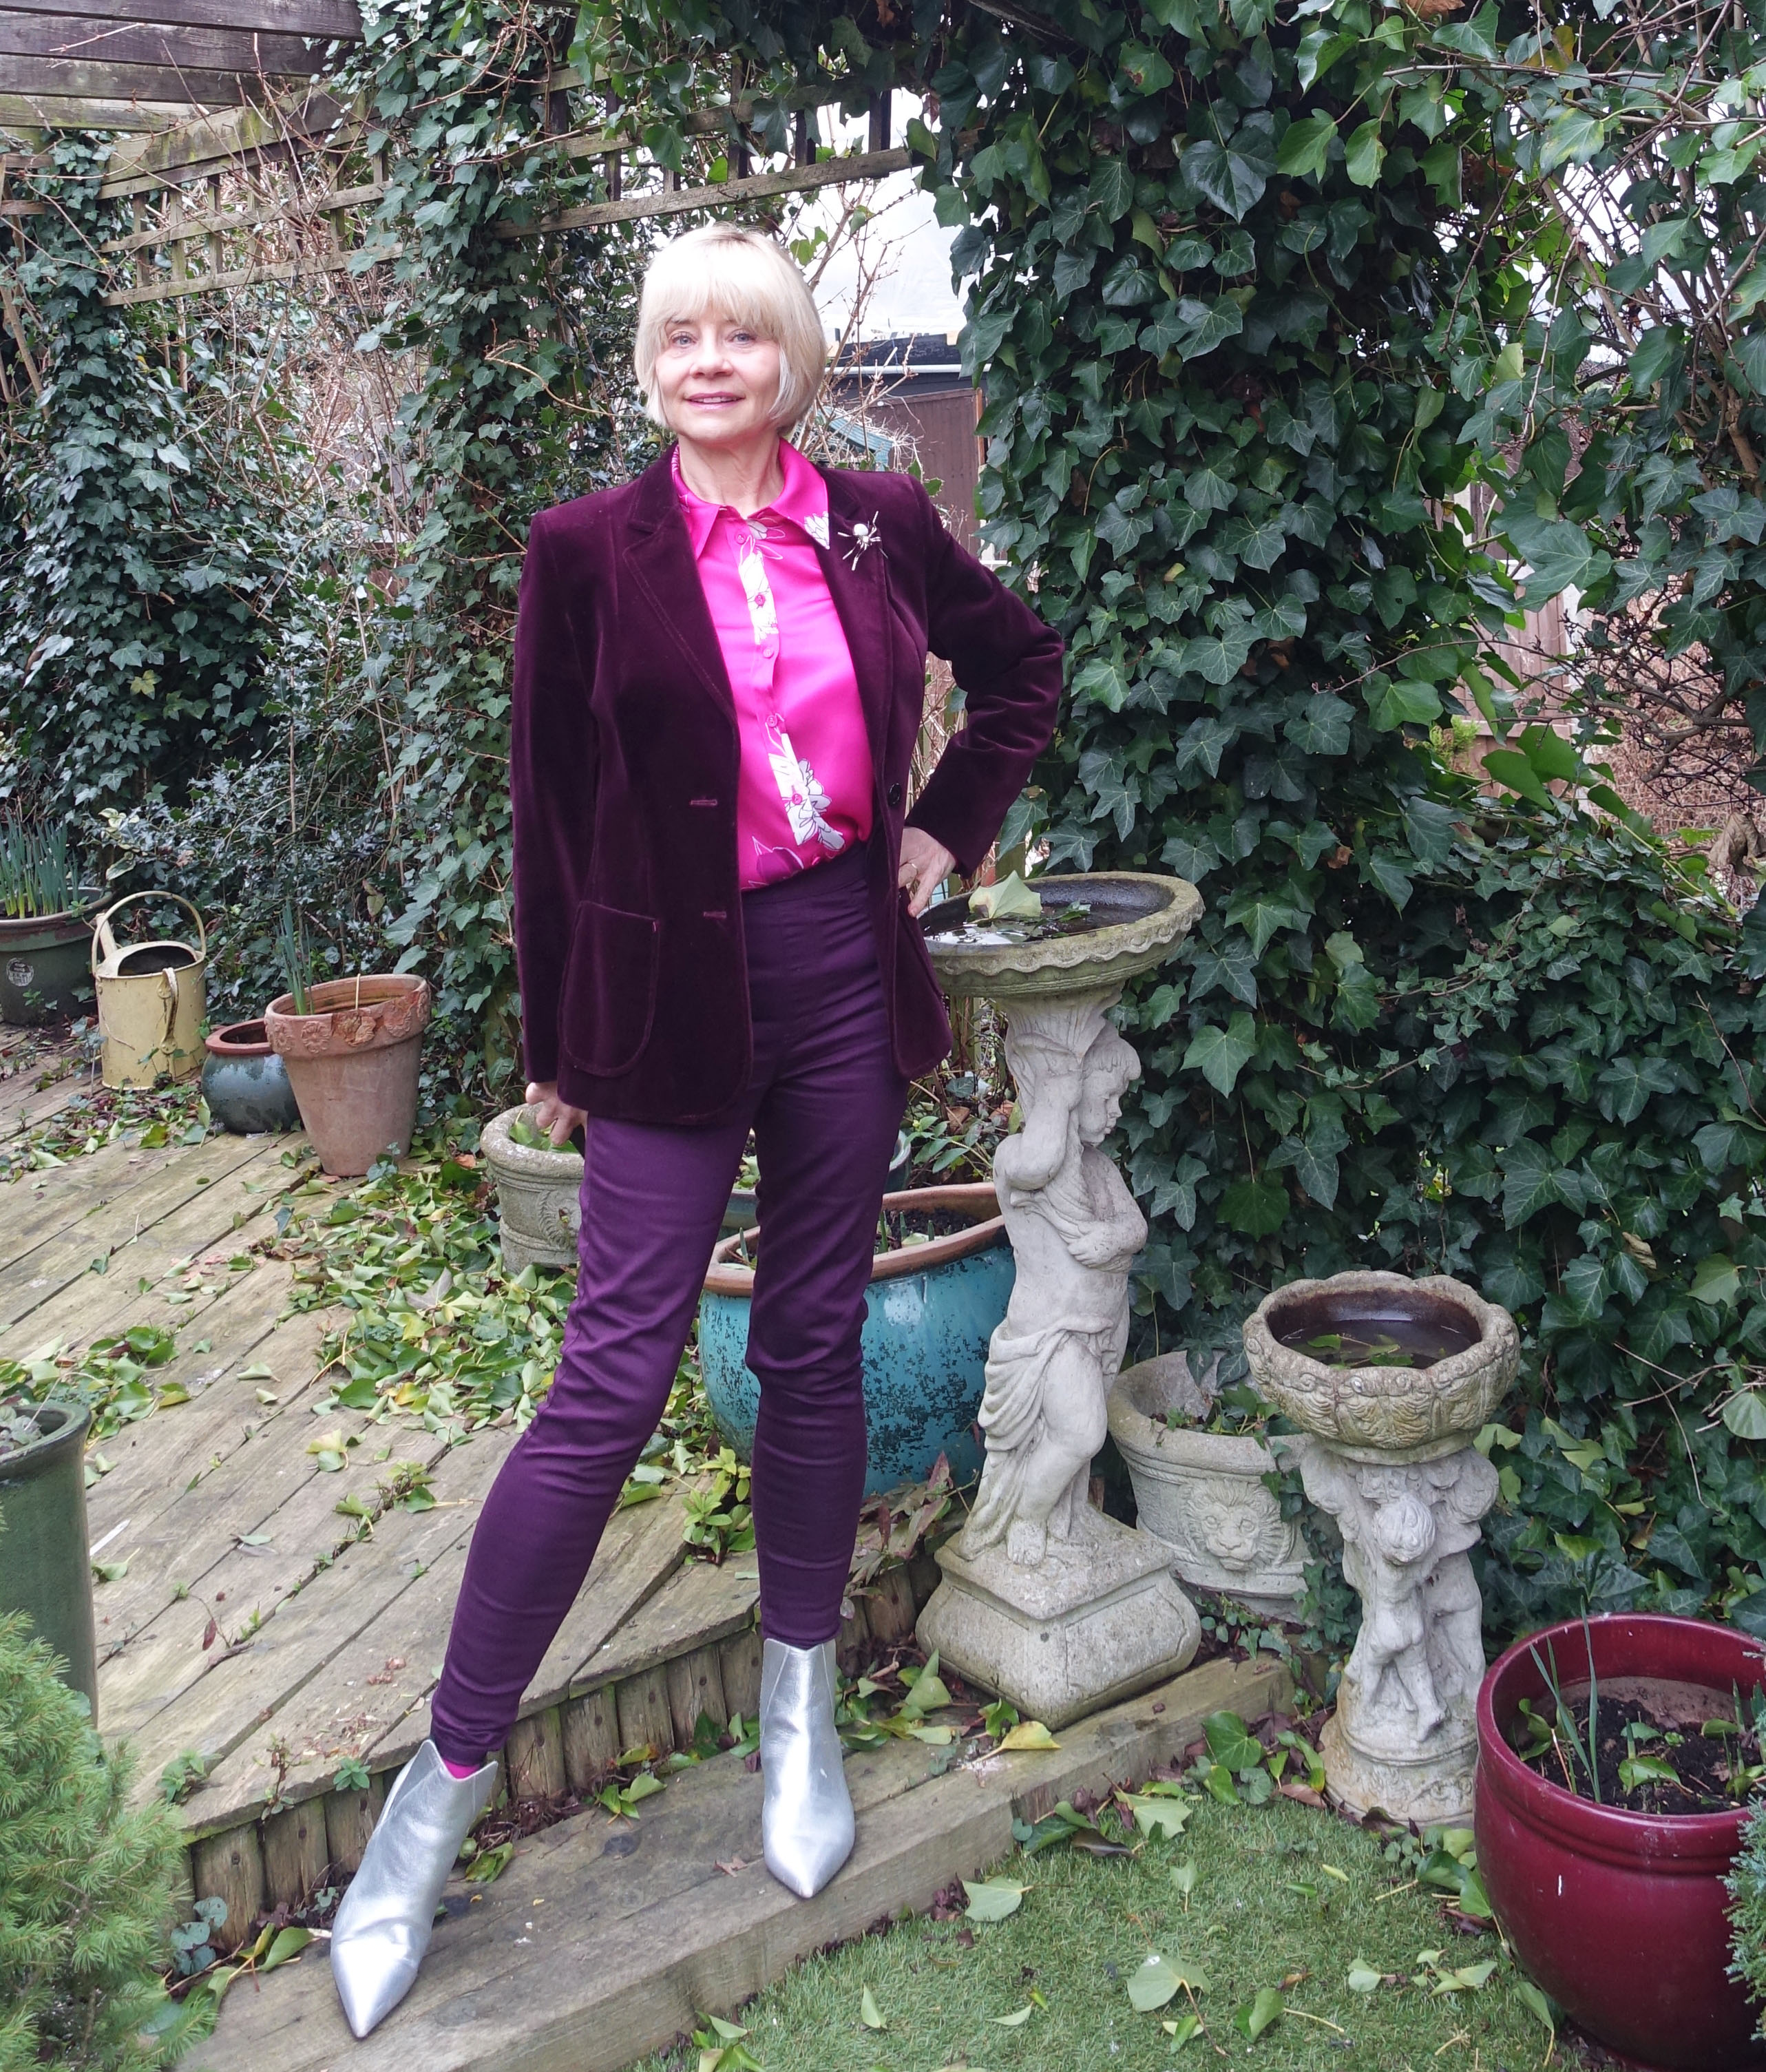 Gail Hanlon from over-50s blog Is This Mutton wearing a burgundy velvet jacket, cerise print blouse, silver ankle boots and burgundy jeggings